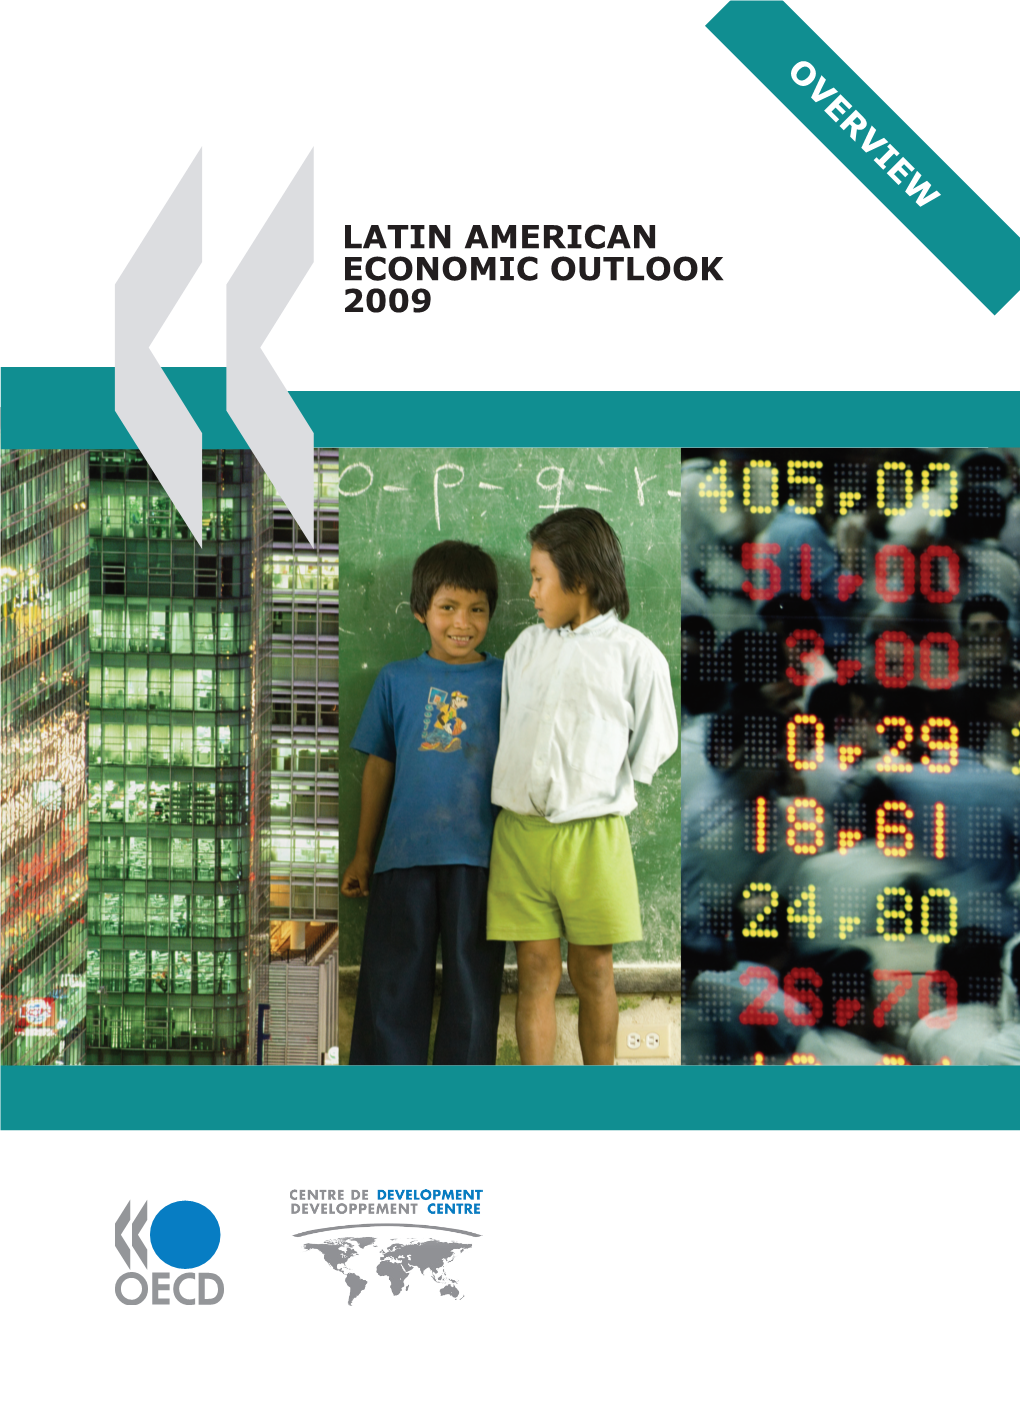 Latin American Economic Outlook 2009 Overview